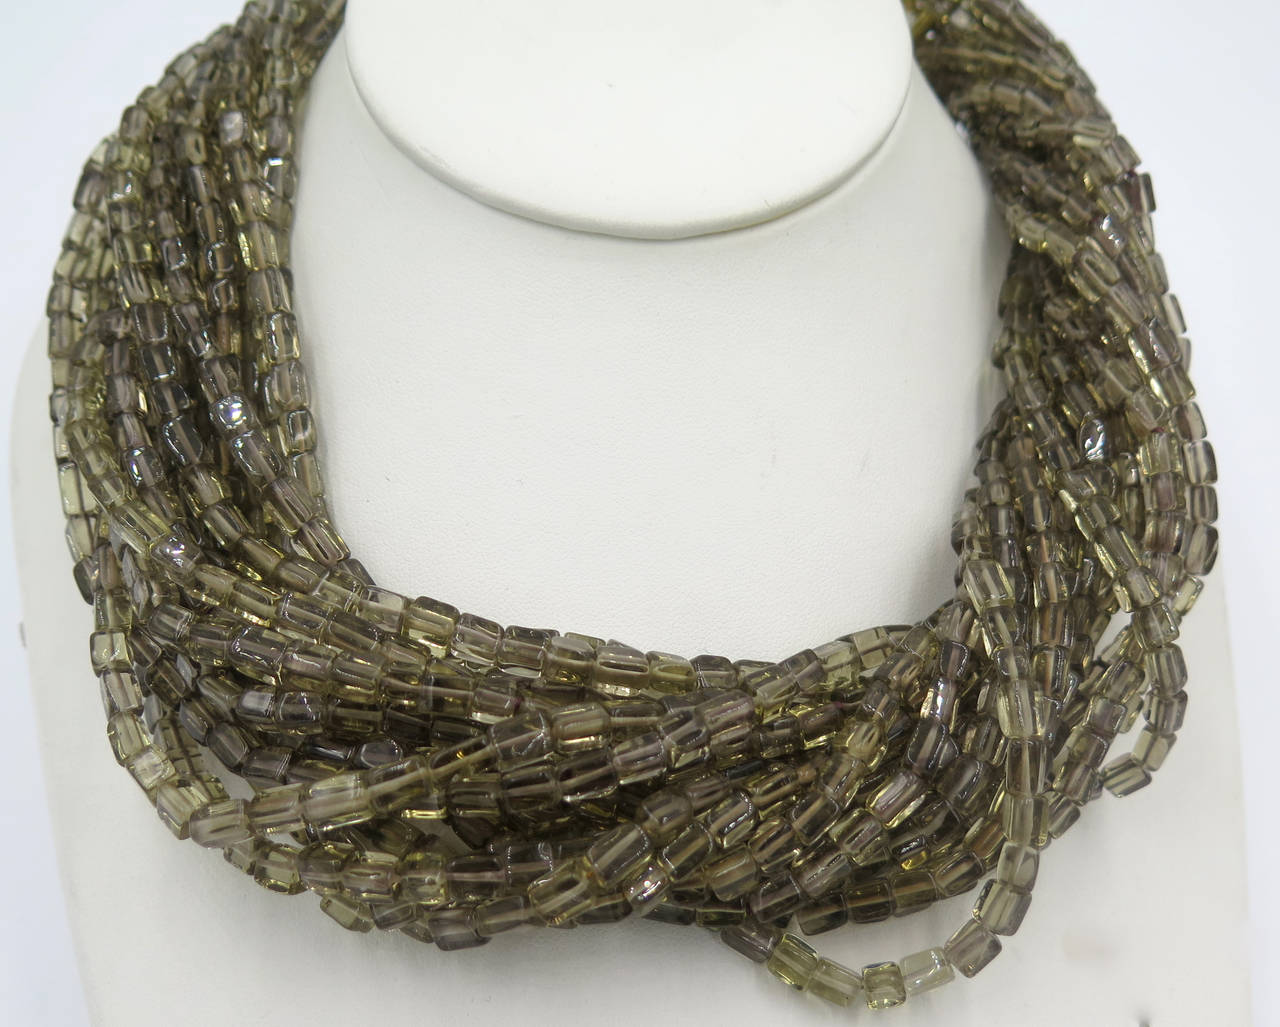 A multistrand andalusite and colored diamond necklace, Marilyn Cooperman.  Consisting of seventeen strands of barrel shape andalusite beads strung with a sterling silver and 18 karat yellow gold double leaf motif clasp containing numerous pear shape